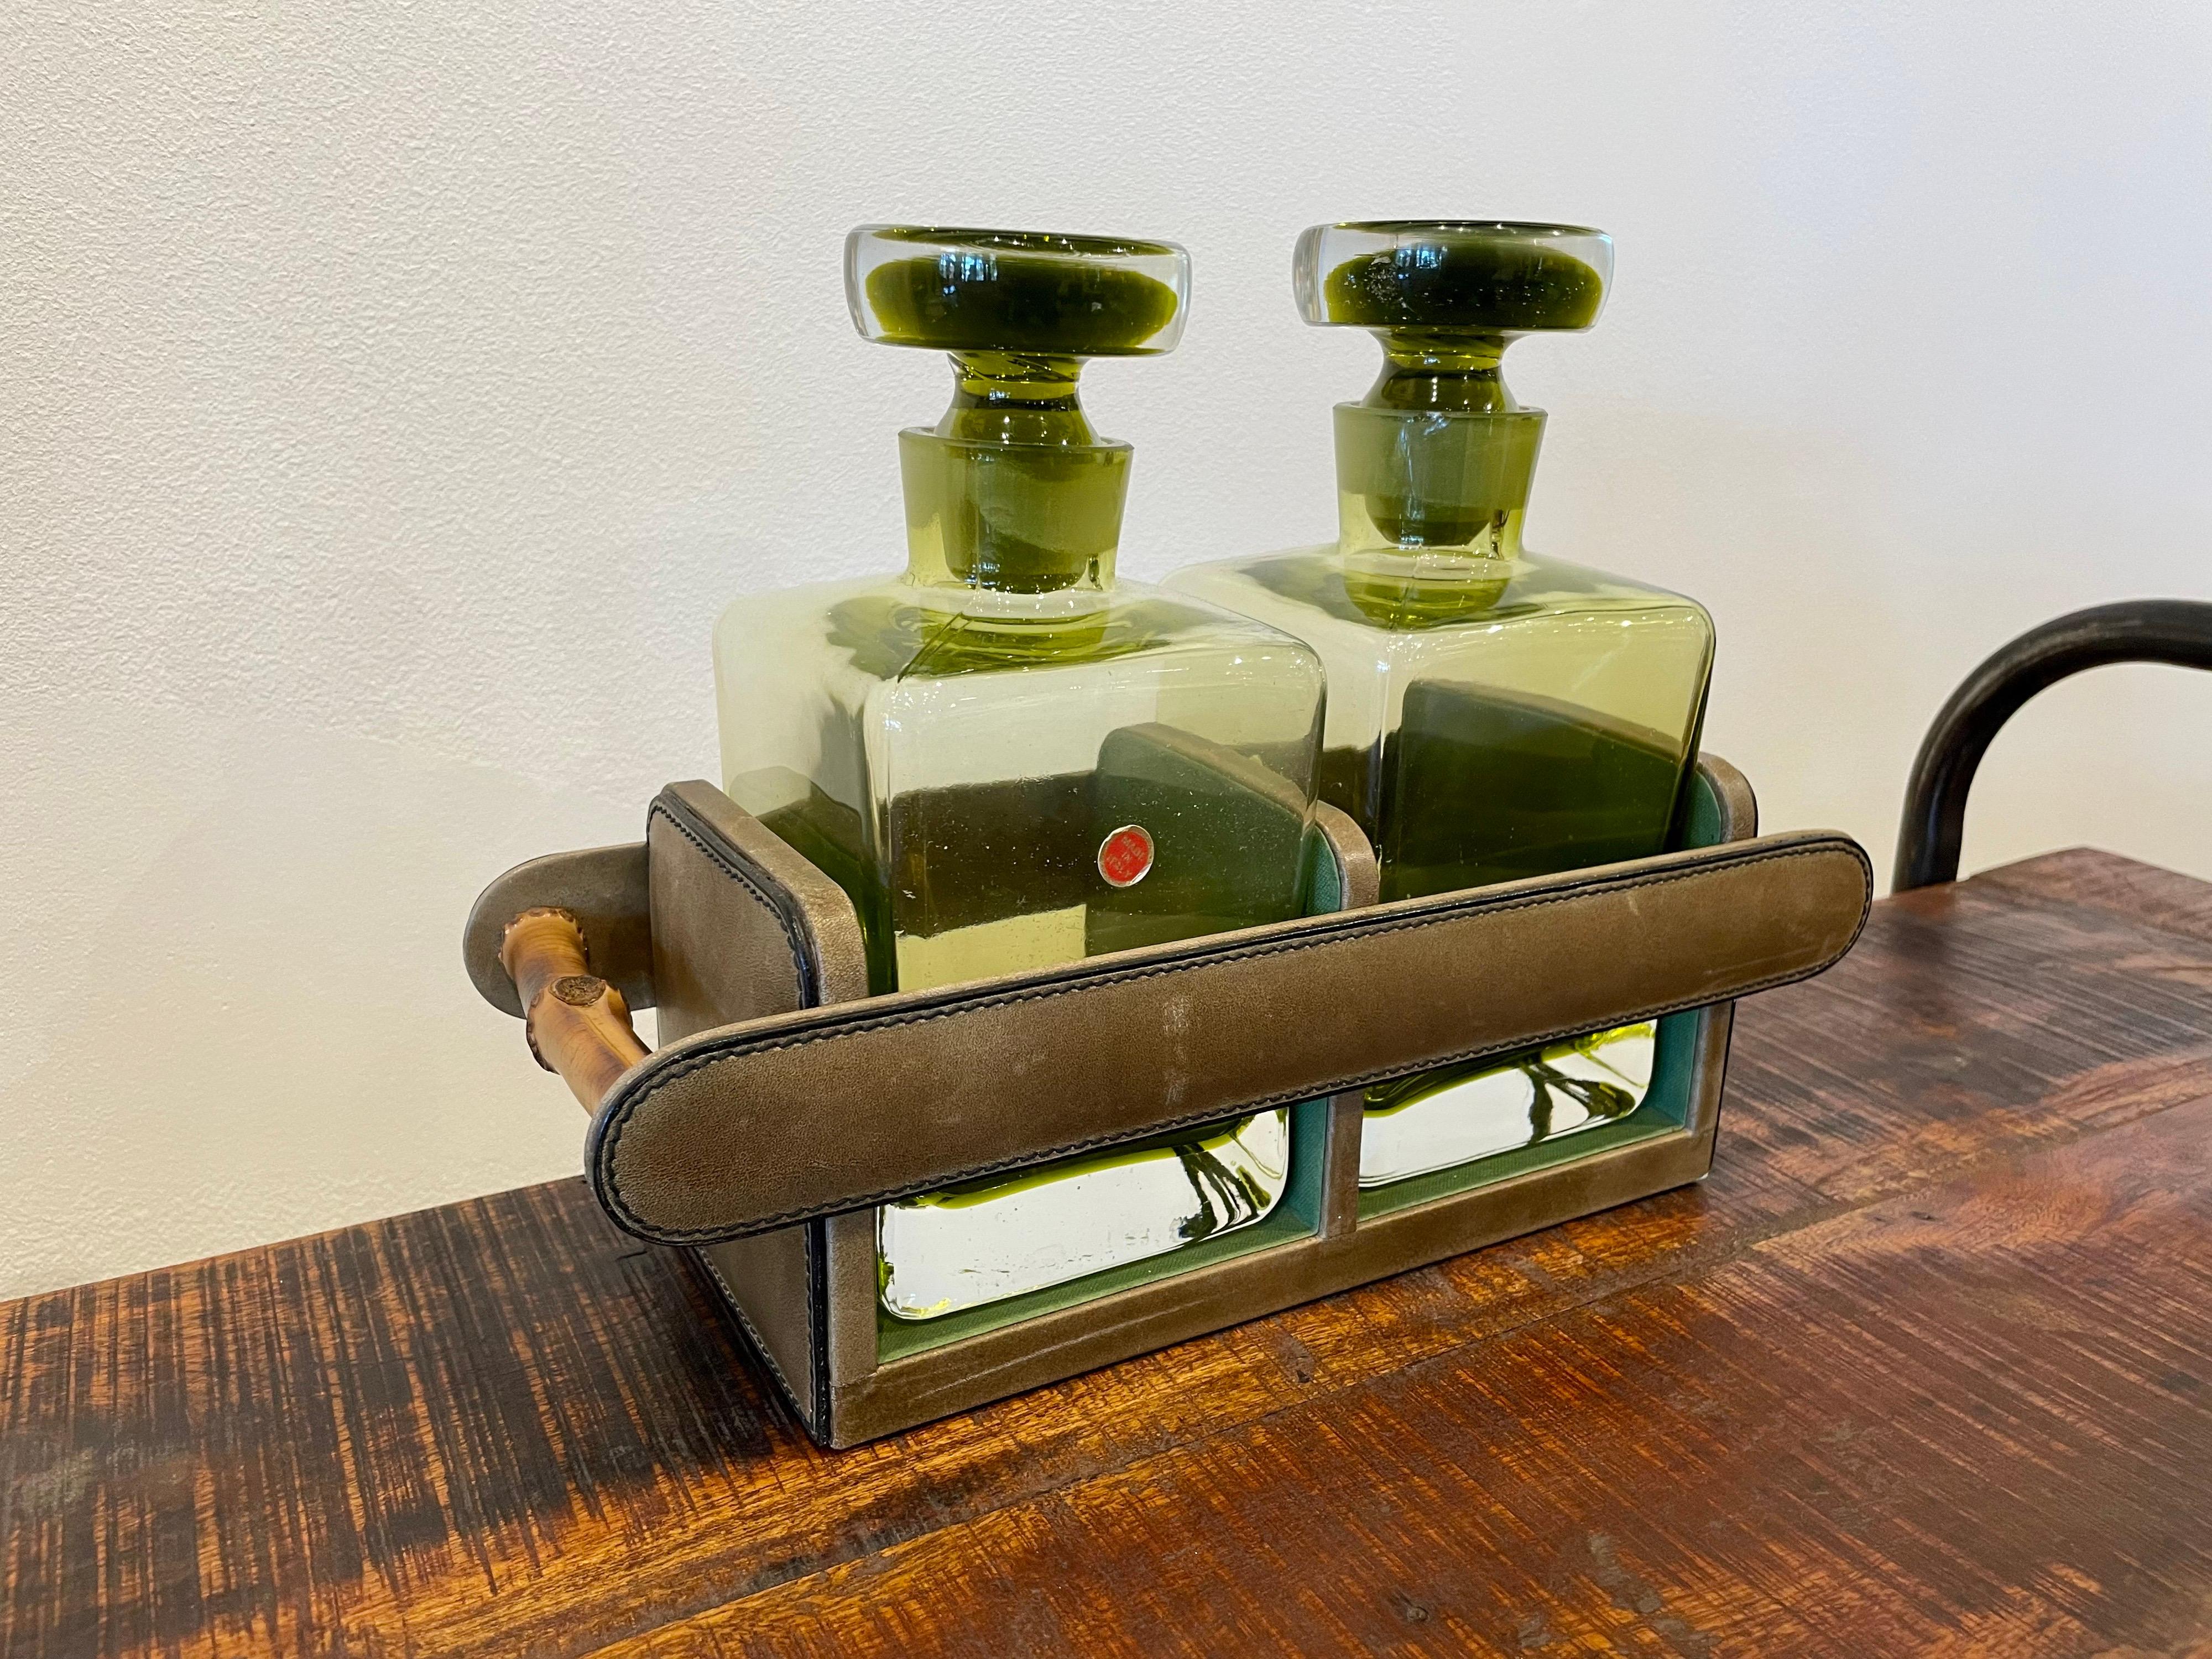 An amazing Vintage Set of Green glass decanters with a beautiful stitched green leather holder and bamboo handles. The whole thing just screams of luxury and beauty.